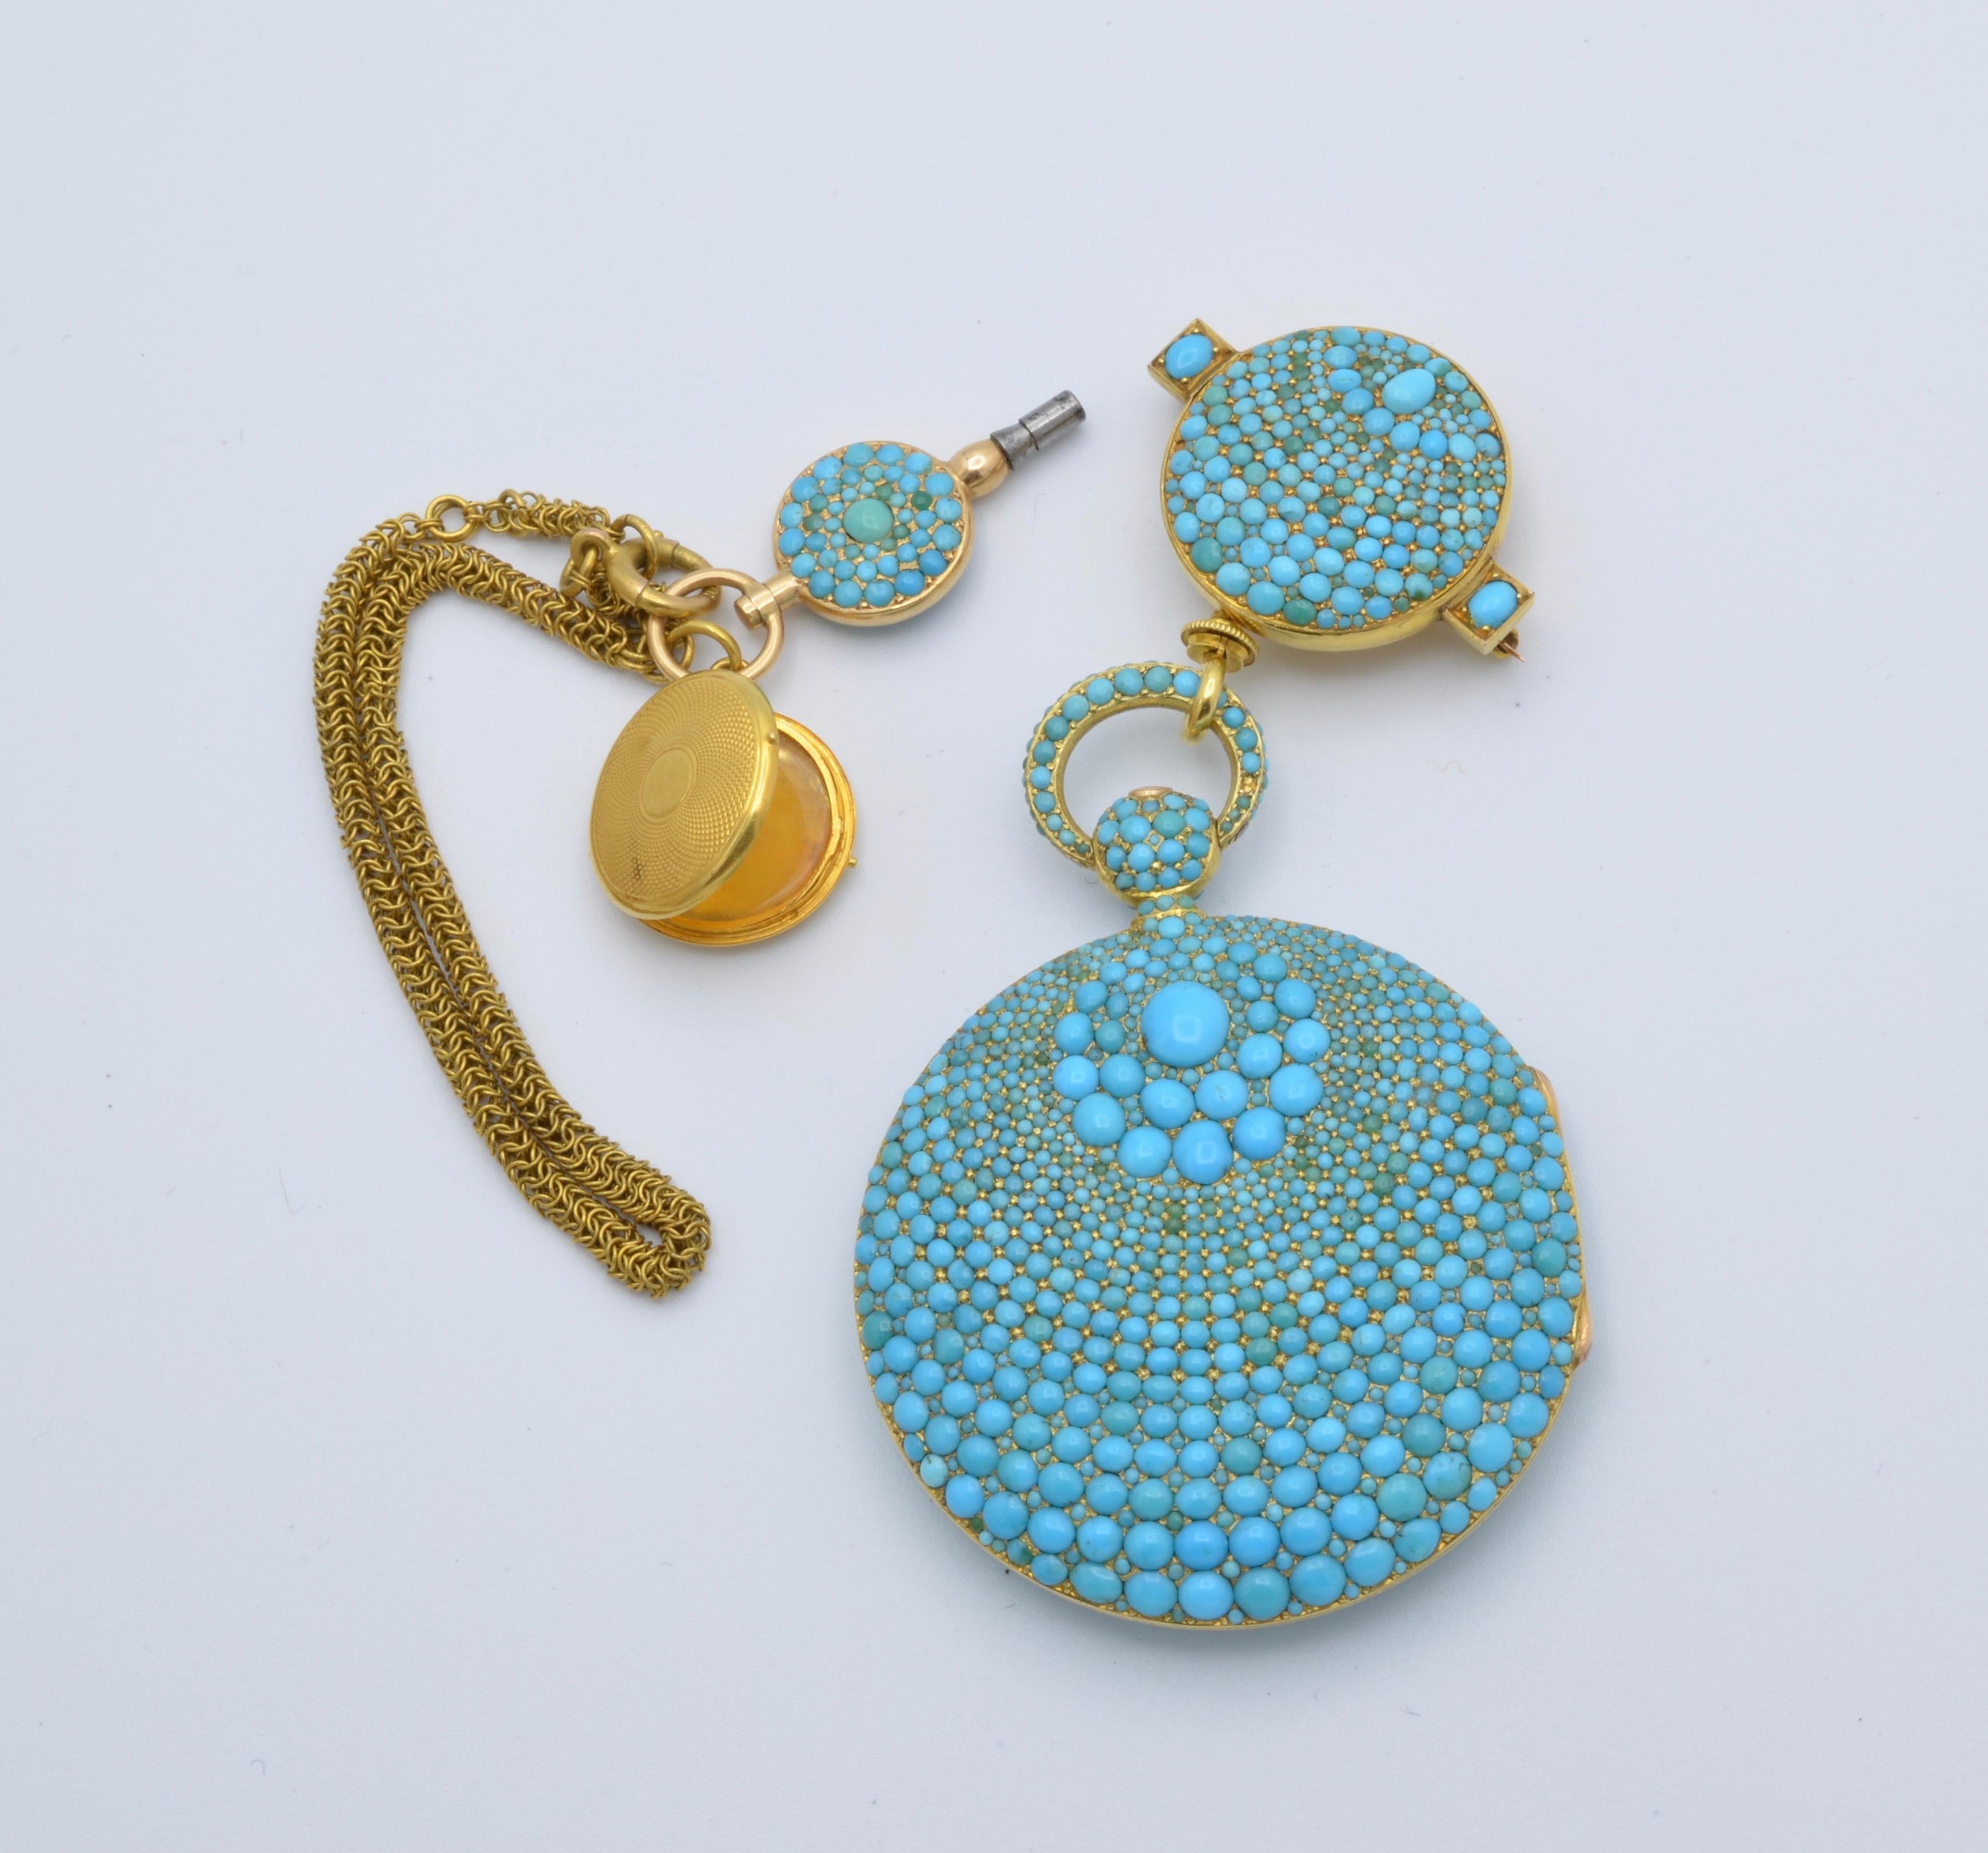 Josephine de Bauharnais could be wearing this incredible blue turquoise watch on an incredible dress... A yellow gold pocket watch made in Geneva Switzerland signed Jn, Fr, Bautte & C.
It's beautiful inside and out. The detail of the watch box is so